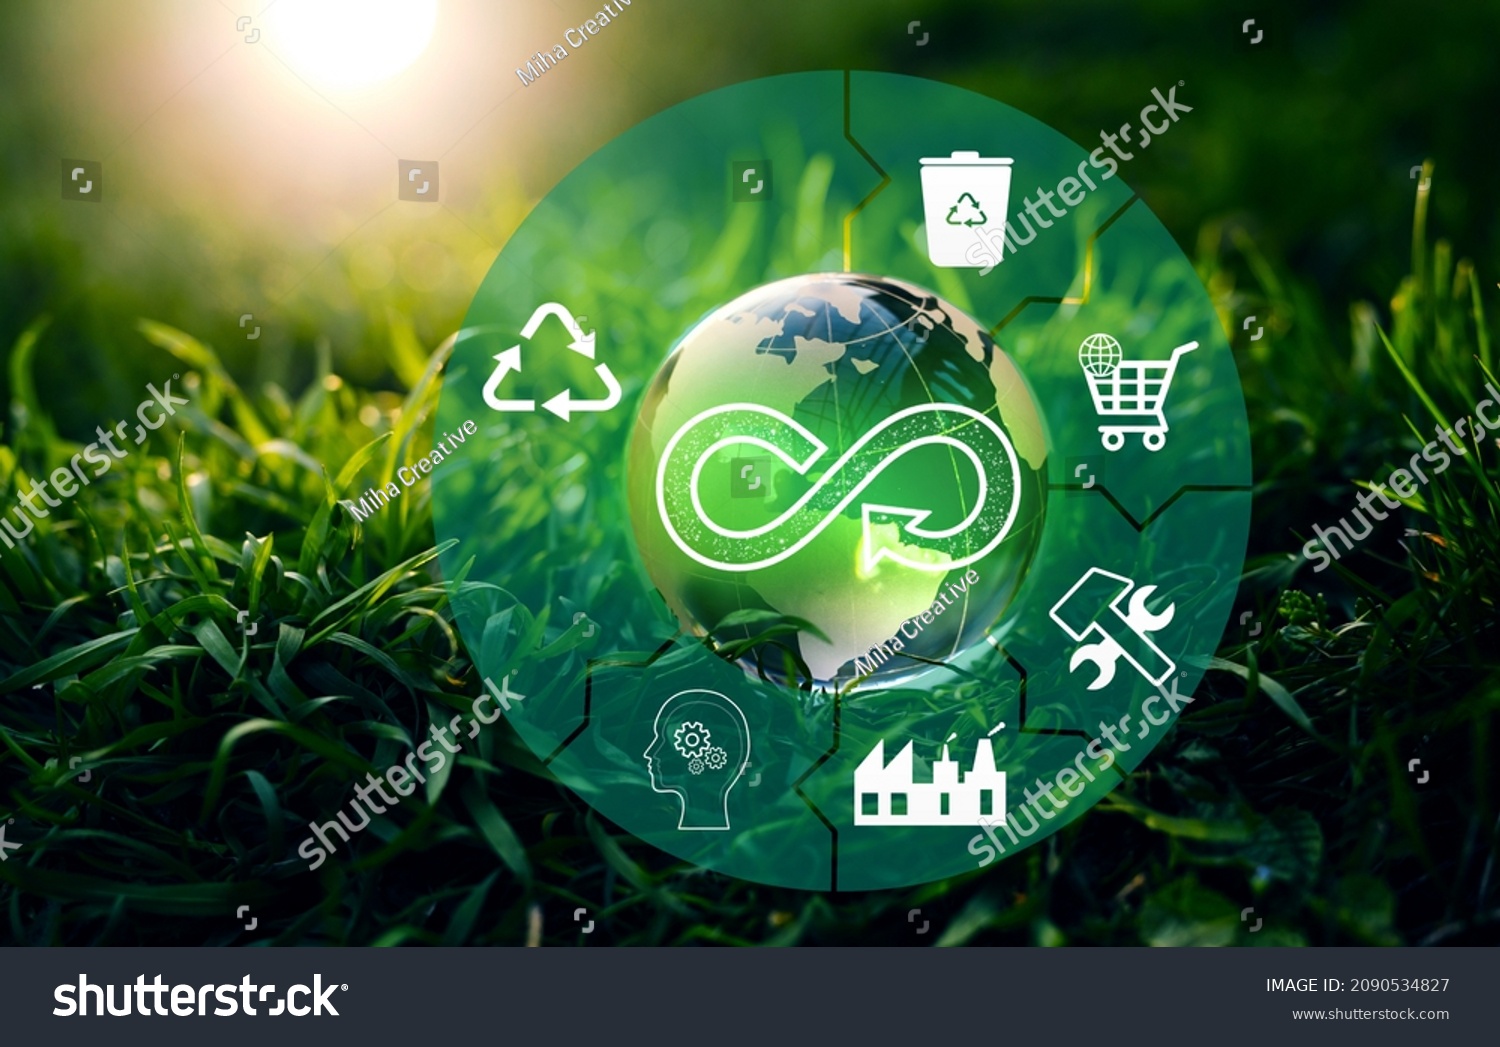 Energy consumption and CO2 emissions are increasing. Circular economy concept. Sharing, reusing,repairing,renovating and recycling existing materials and products as much possible. #2090534827